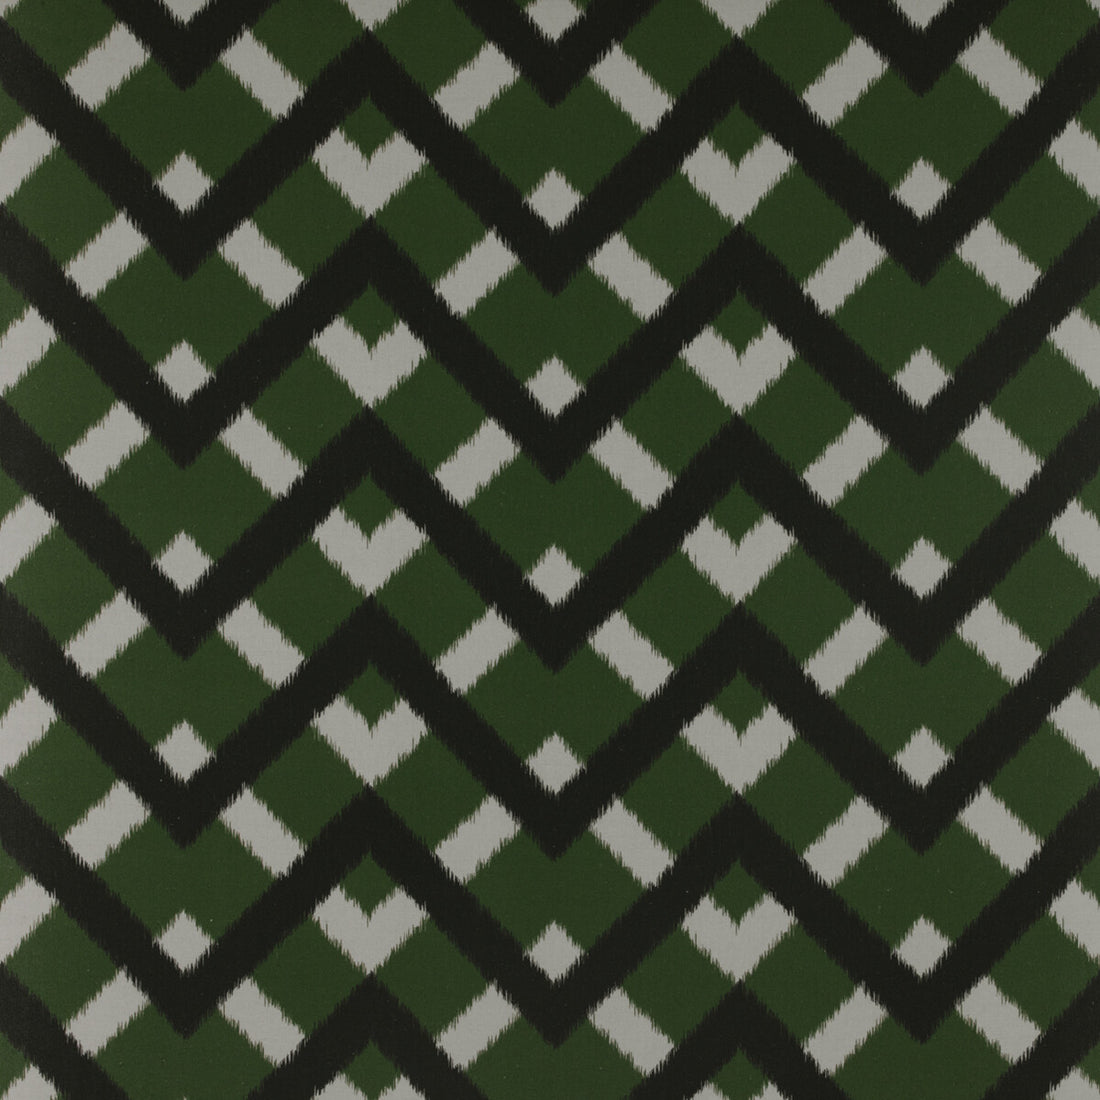 Monti fabric in verde color - pattern GDT5338.001.0 - by Gaston y Daniela in the Tierras collection